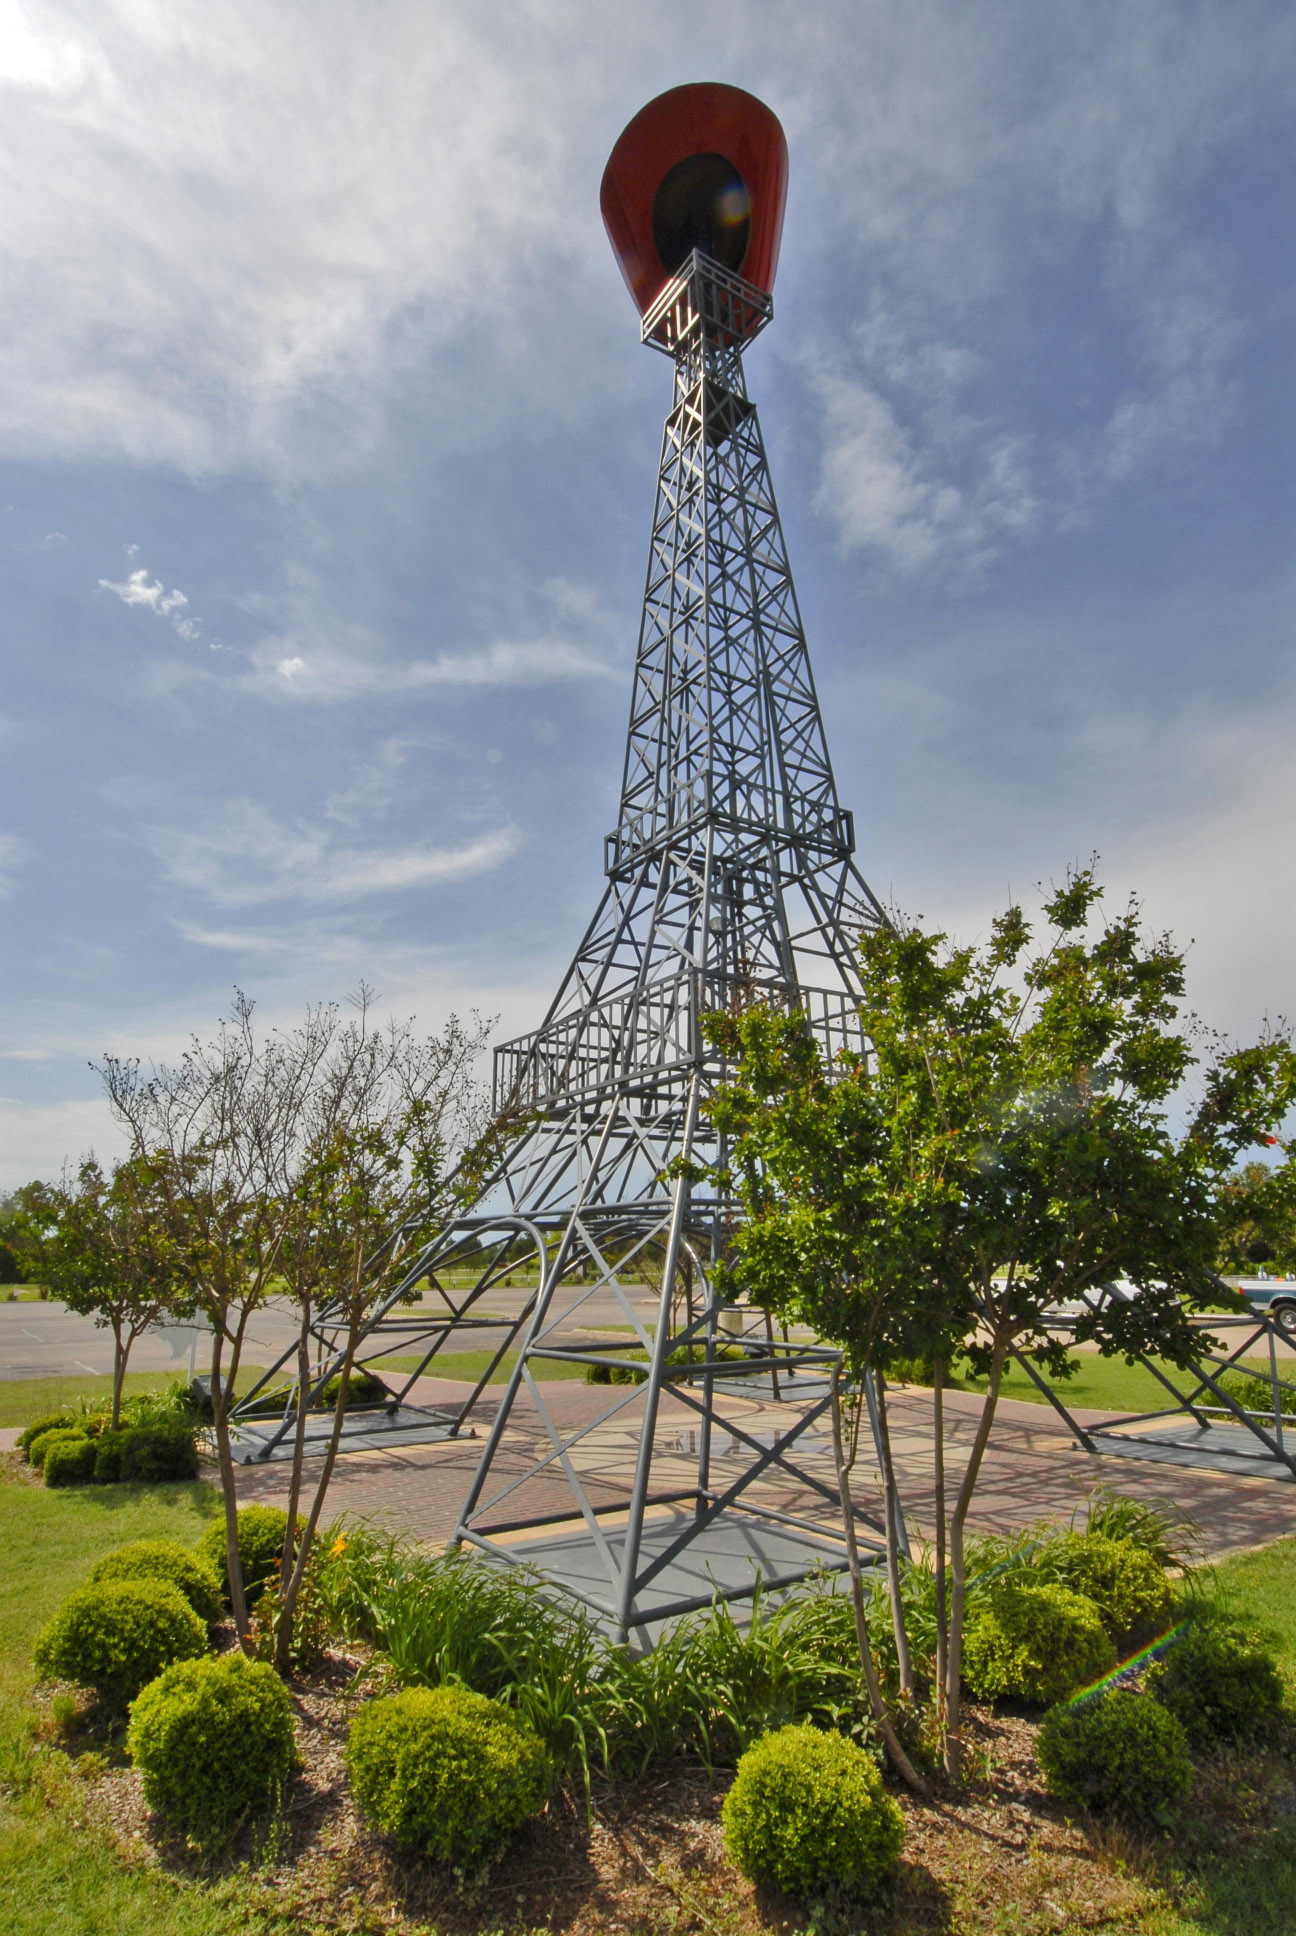 A replica of the Eiffel Tower with a red cowboy hat on top in Paris, Texas